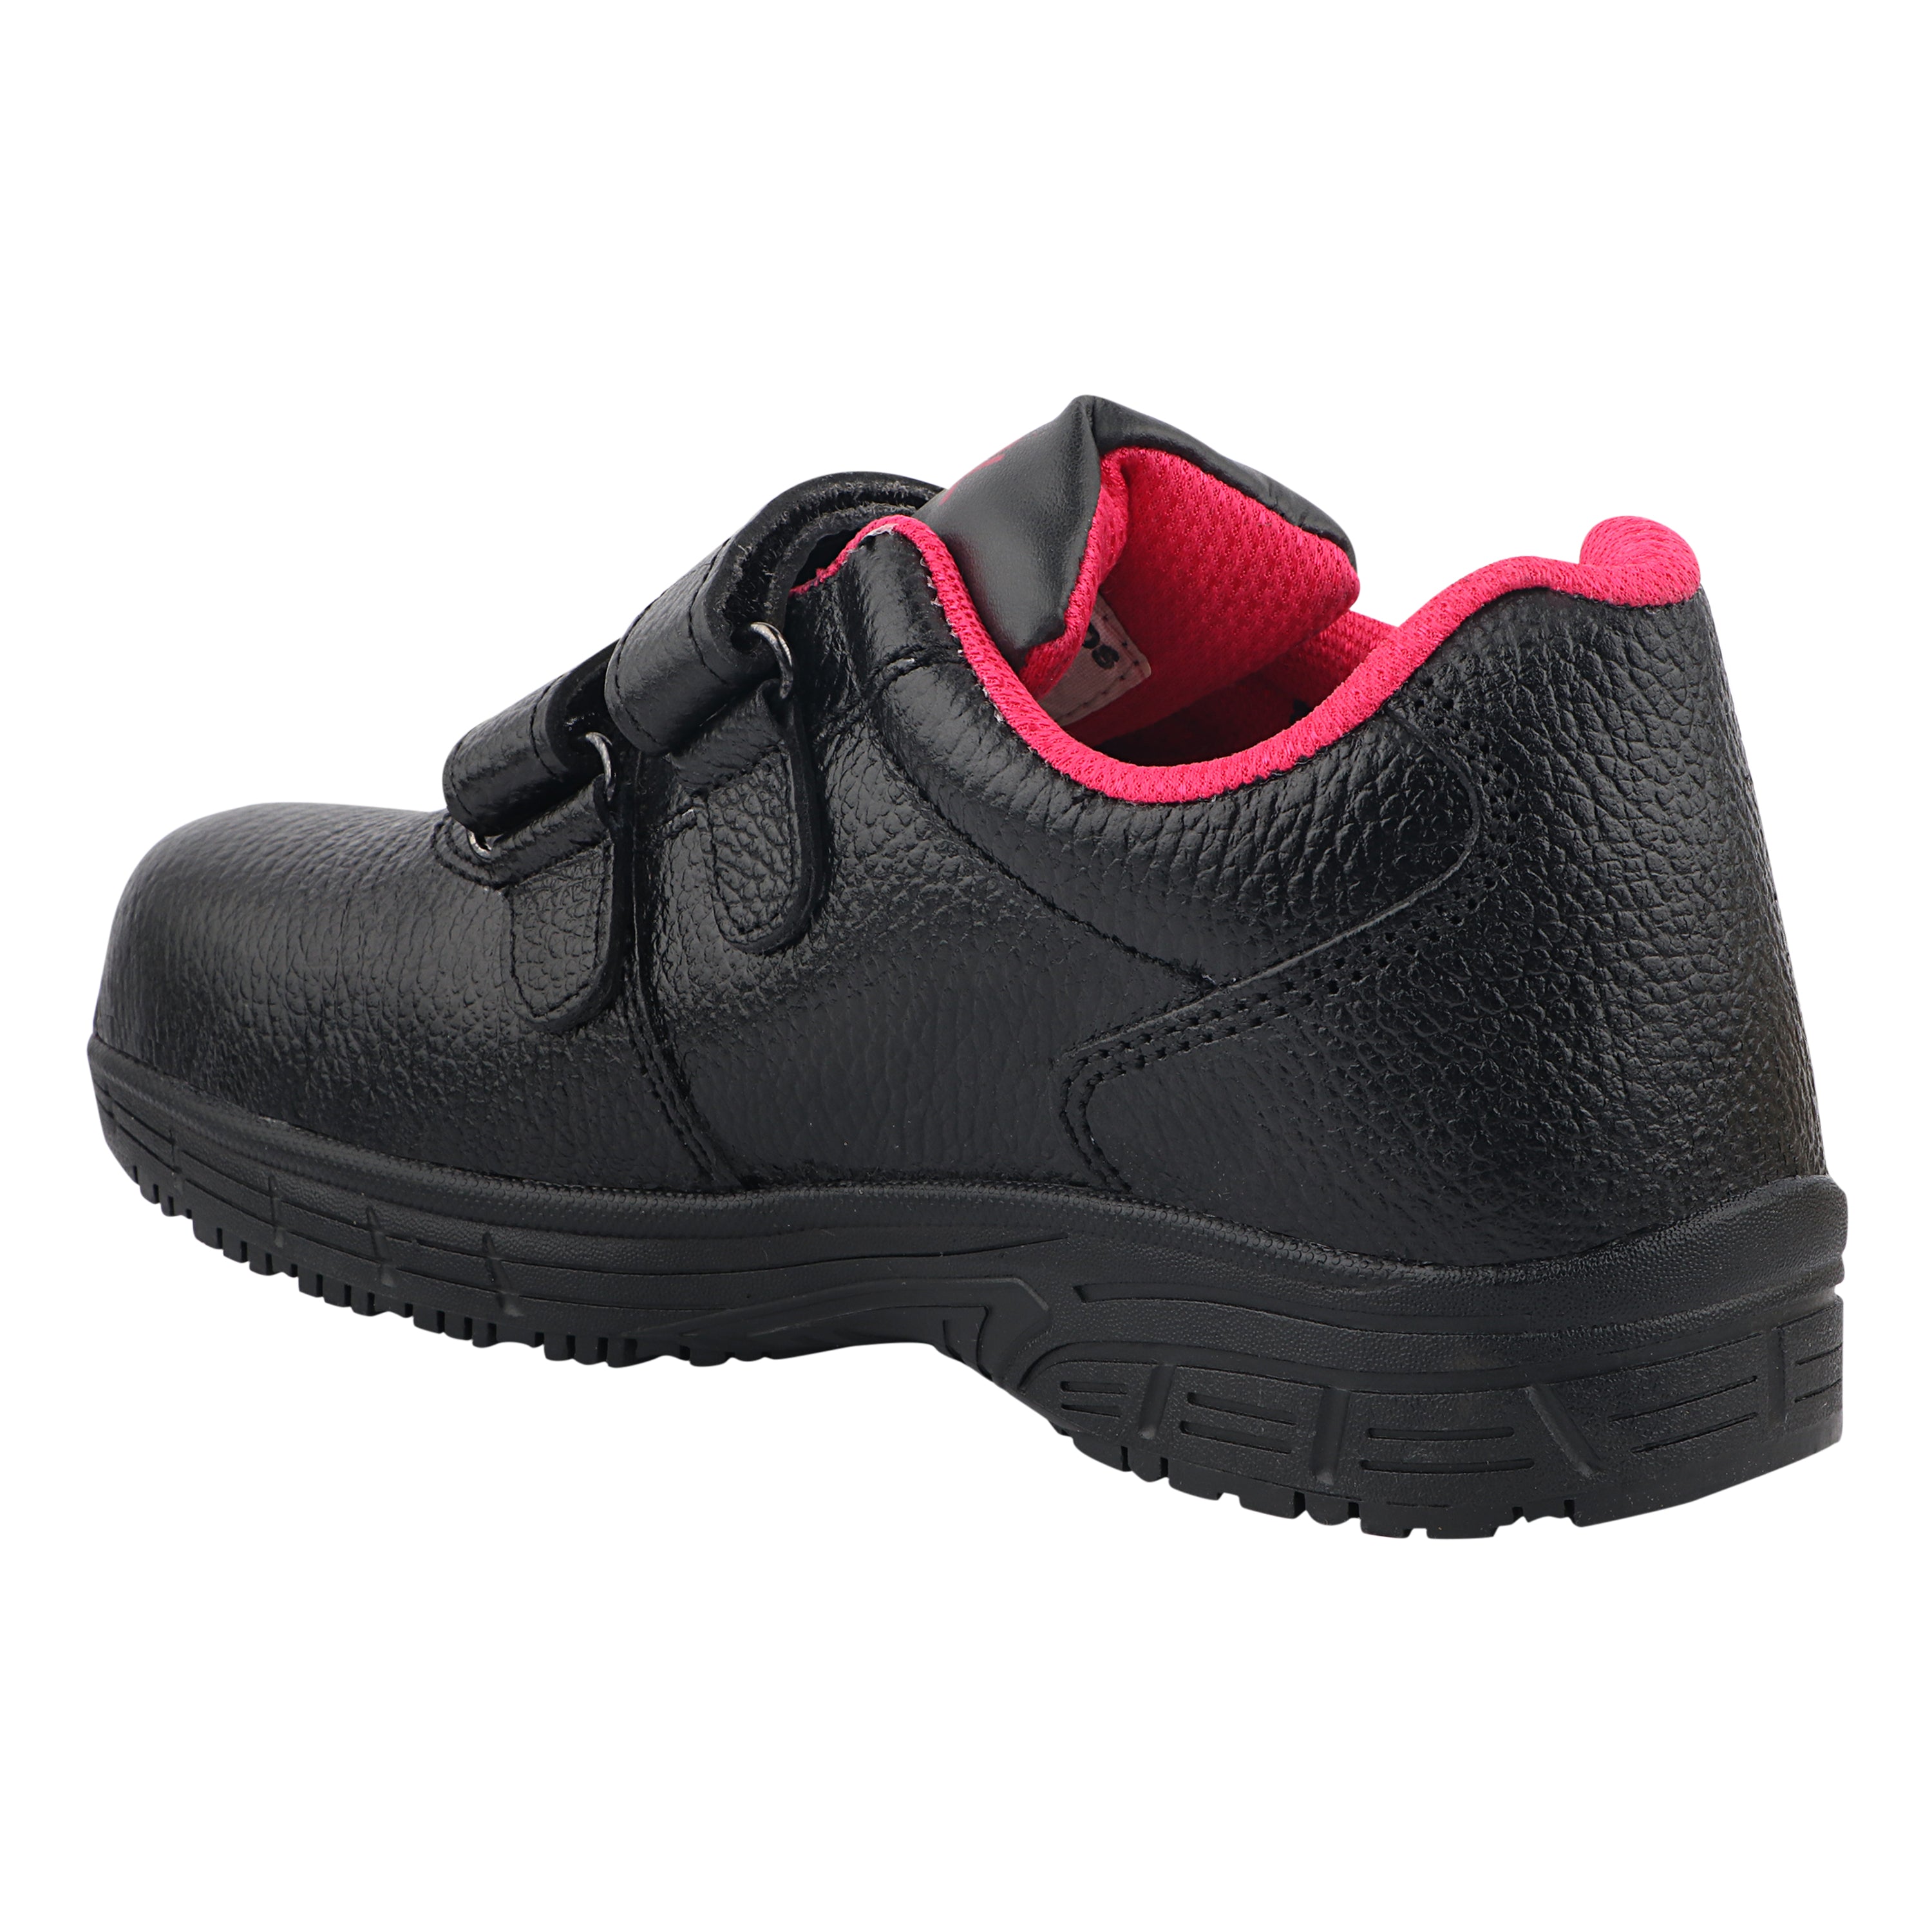 Fuel Gracy Genuine Leather Safety Shoes for Women's Steel Toe Cap With Rubber Sole (Black)